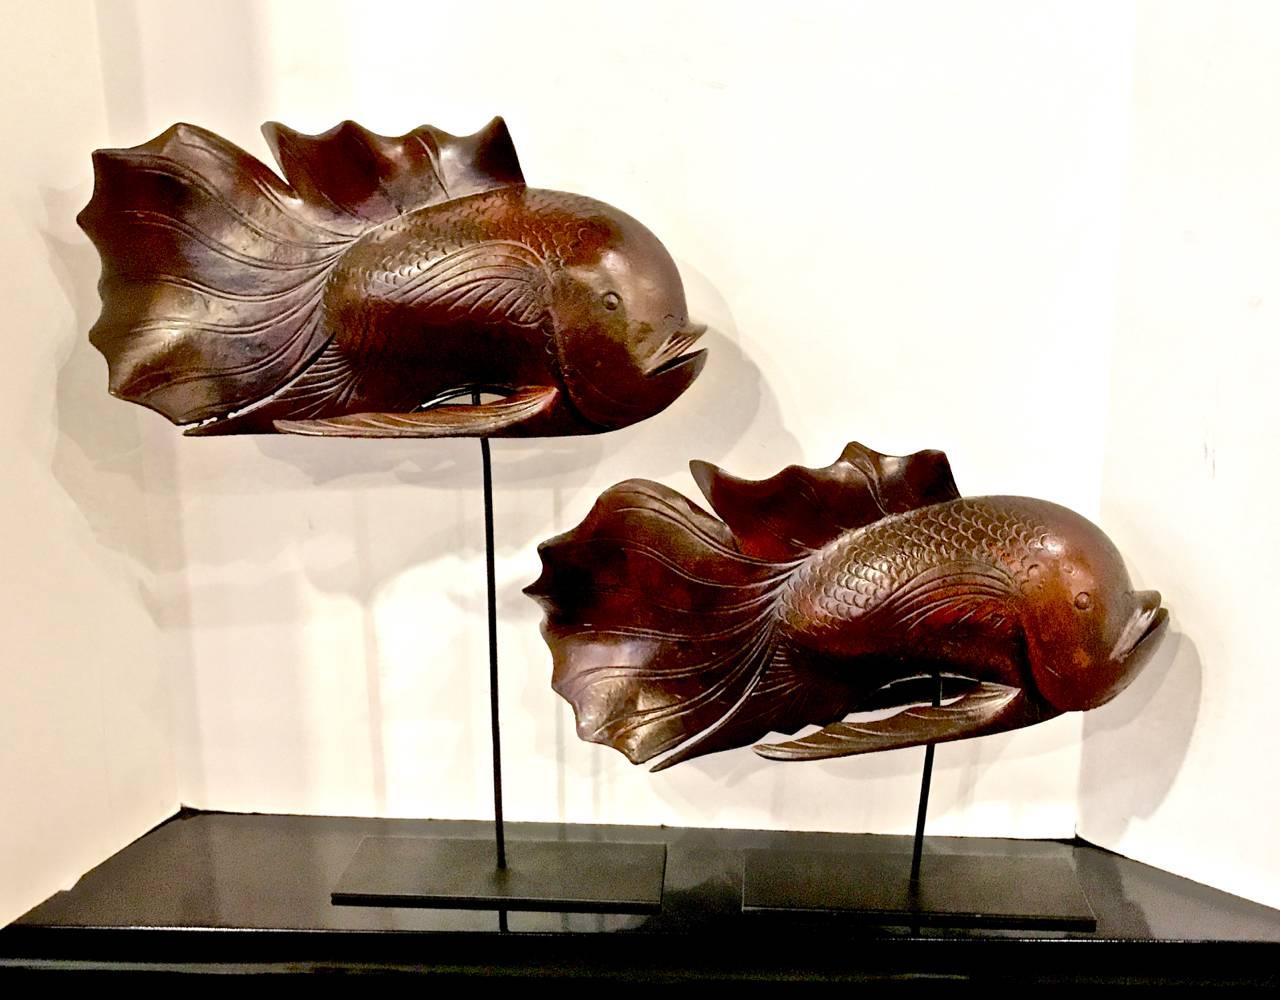 This is a great pair of carved Japanese Koi fish on stands that date to circa 1960-1970. Both koi are in overall very good condition and have just the right amount of patina. The koi are displayed on metal stands.